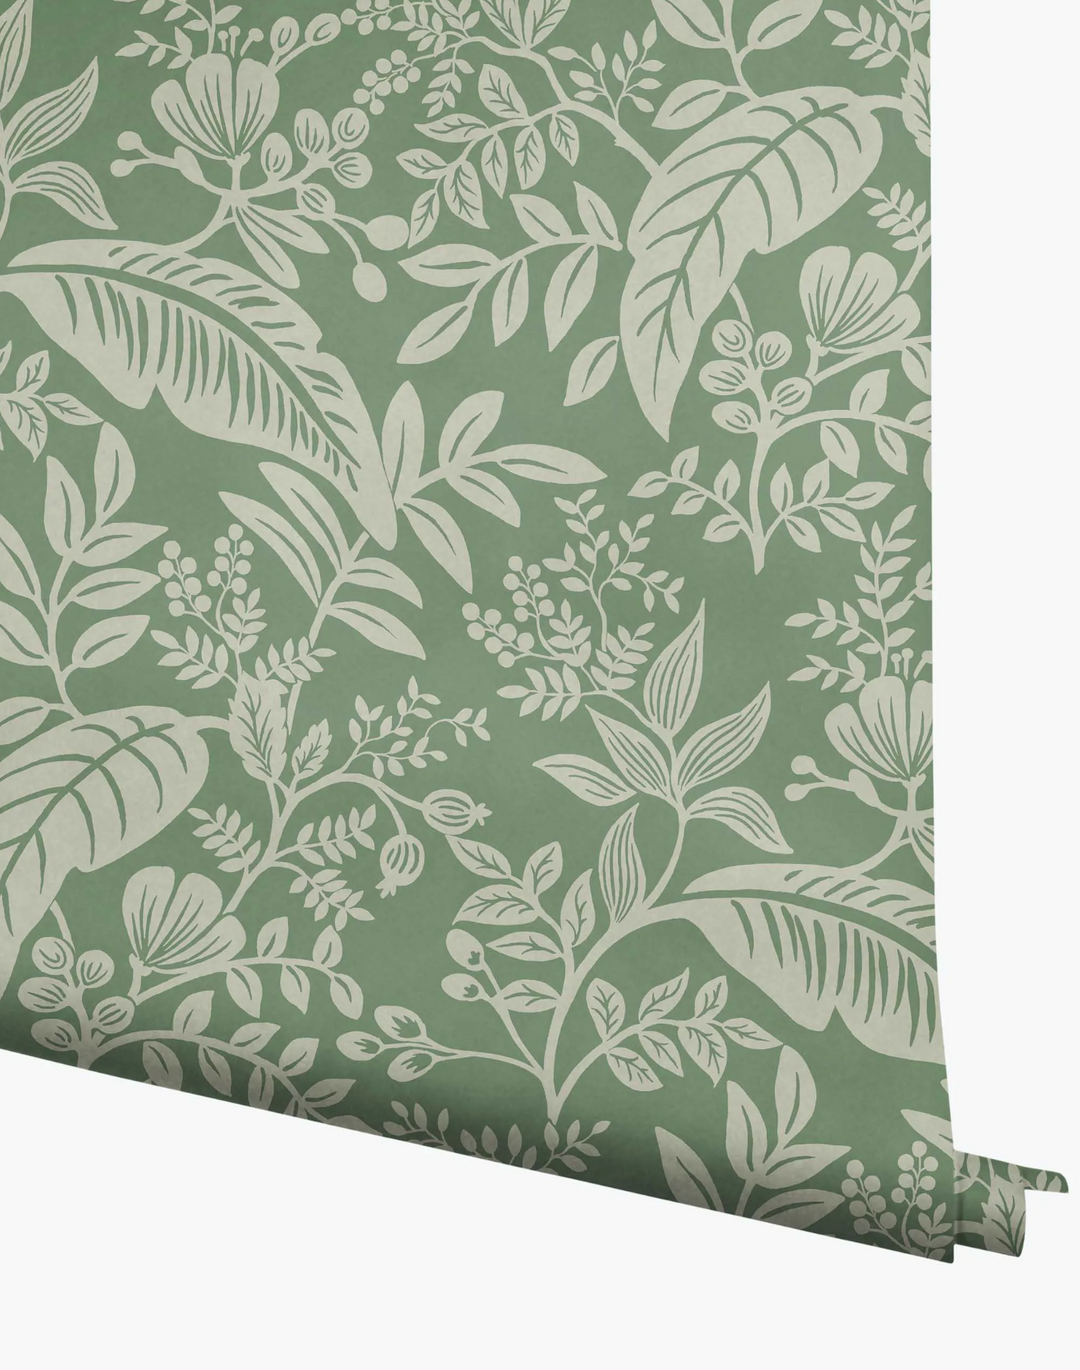 White Traditional Check Wallpaper in Sage Green